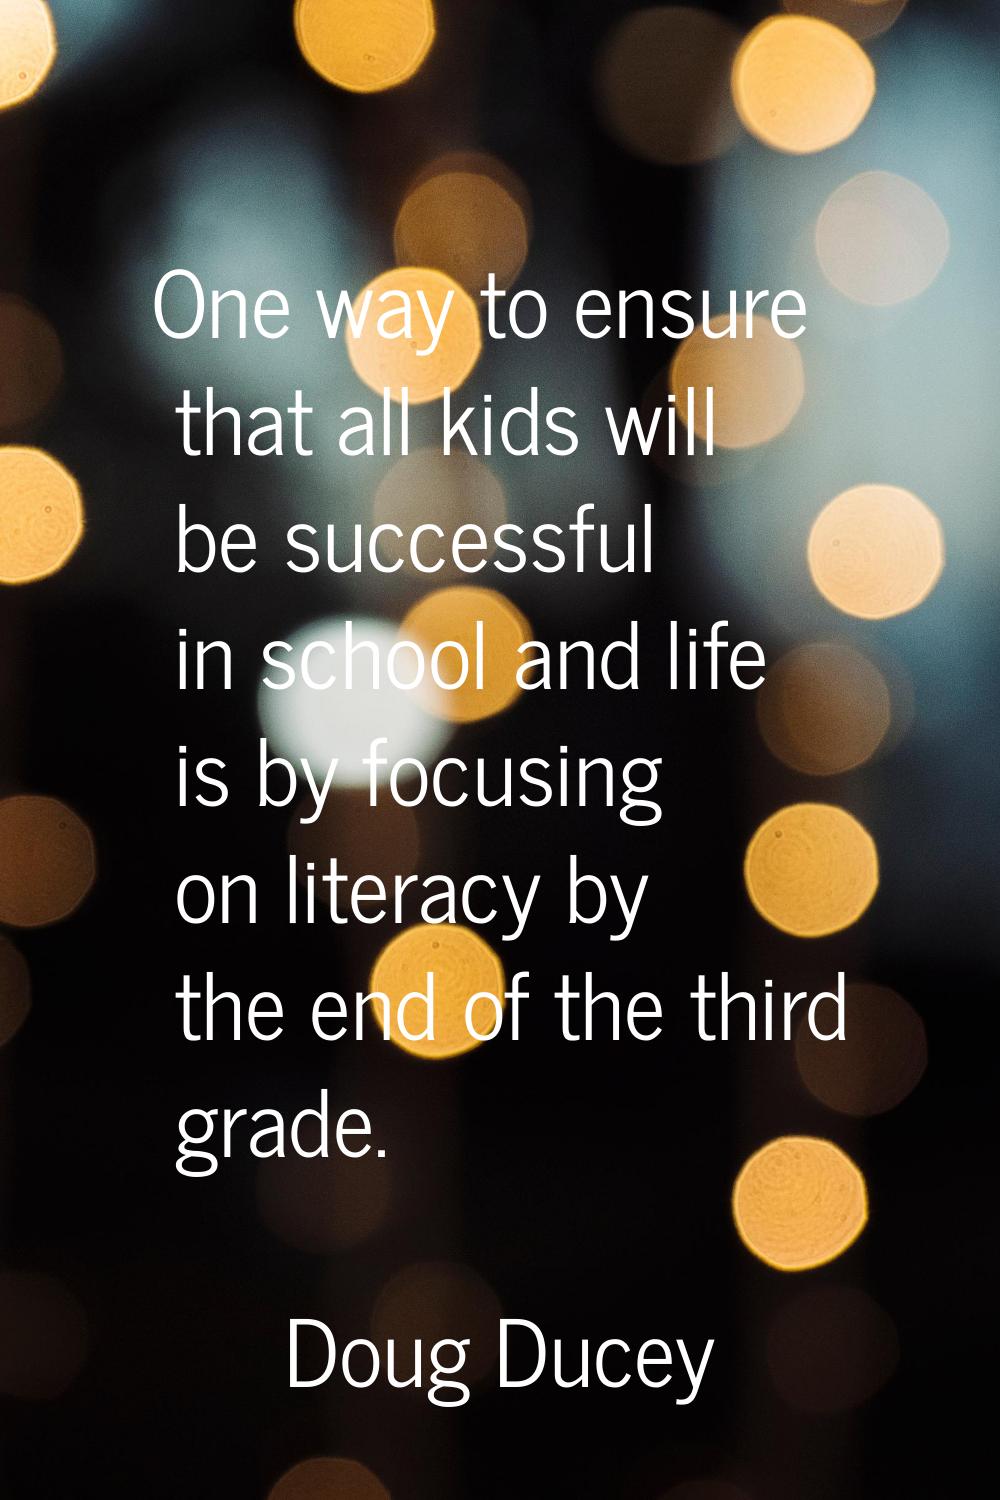 One way to ensure that all kids will be successful in school and life is by focusing on literacy by